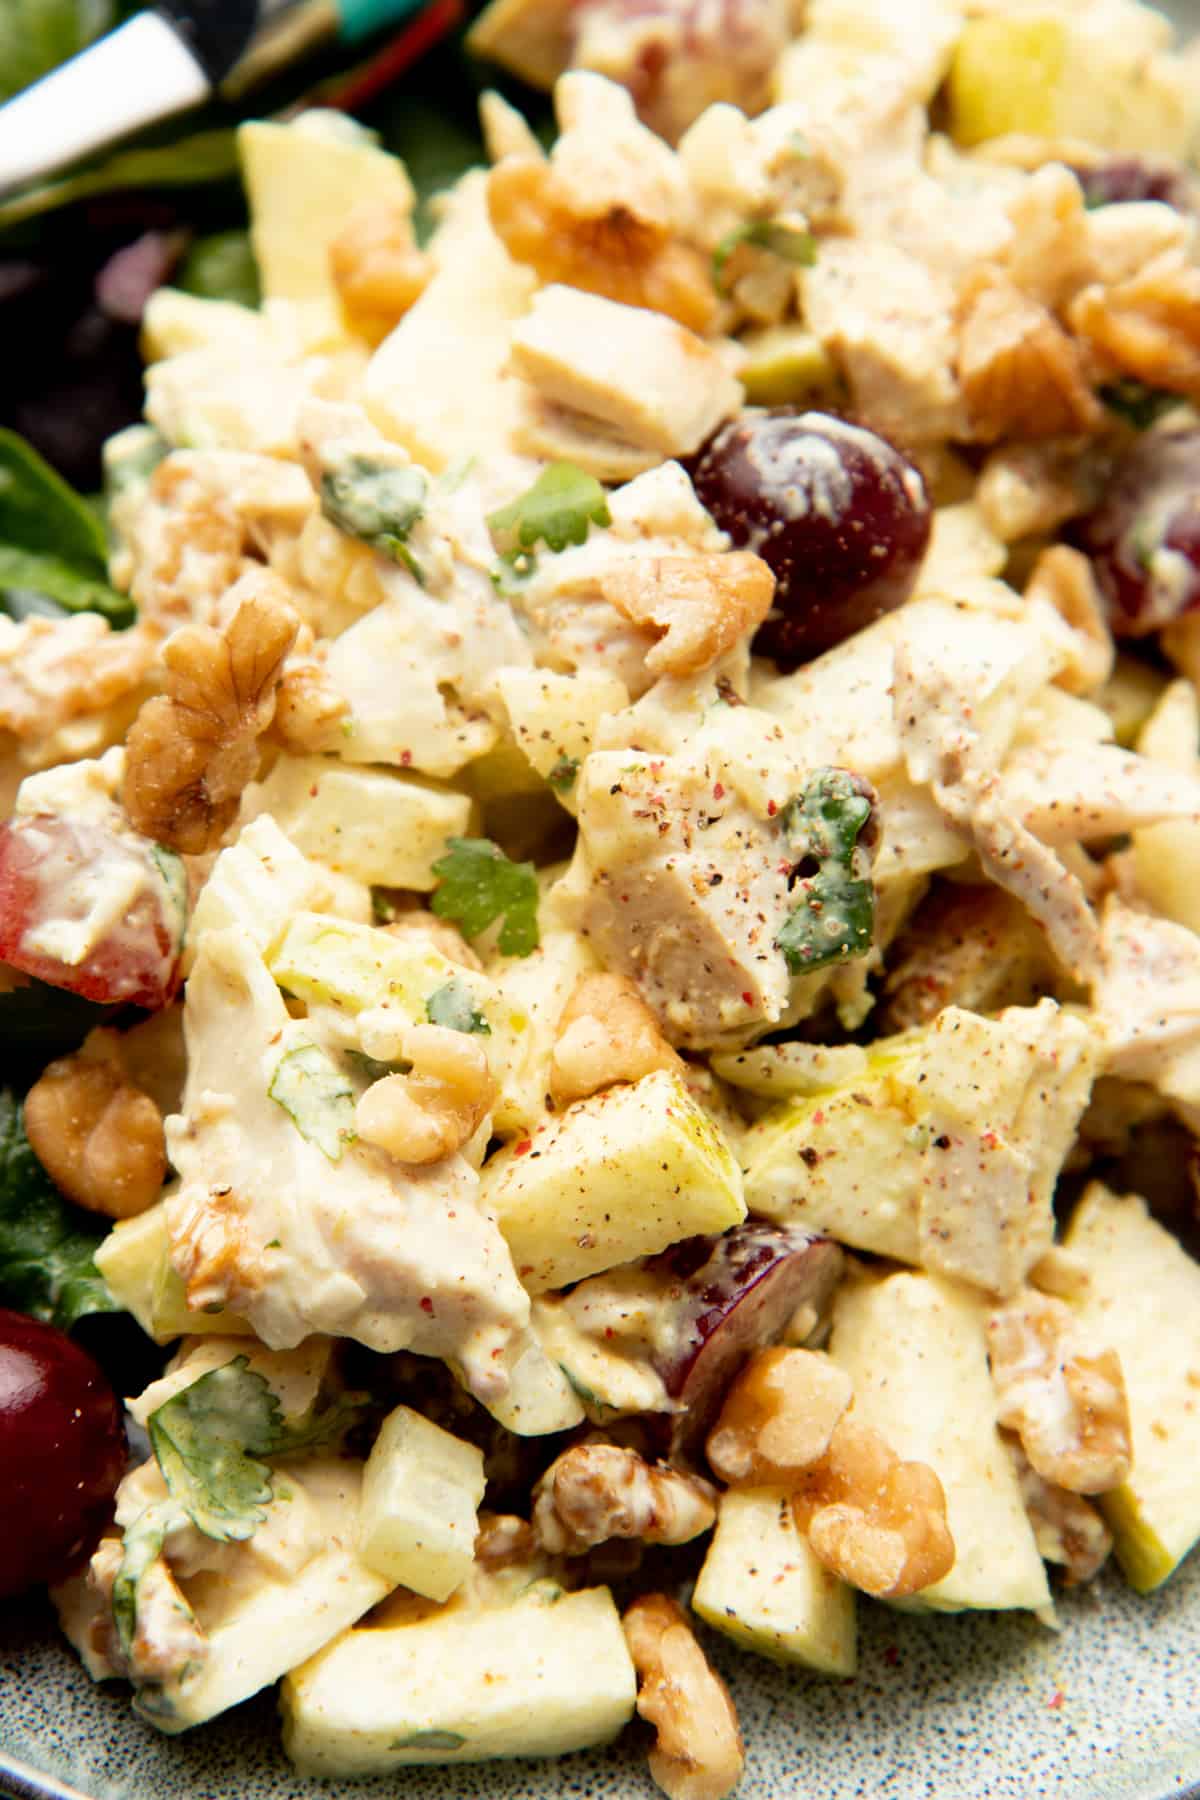 Curry chicken salad includes apples, walnuts, and grapes.